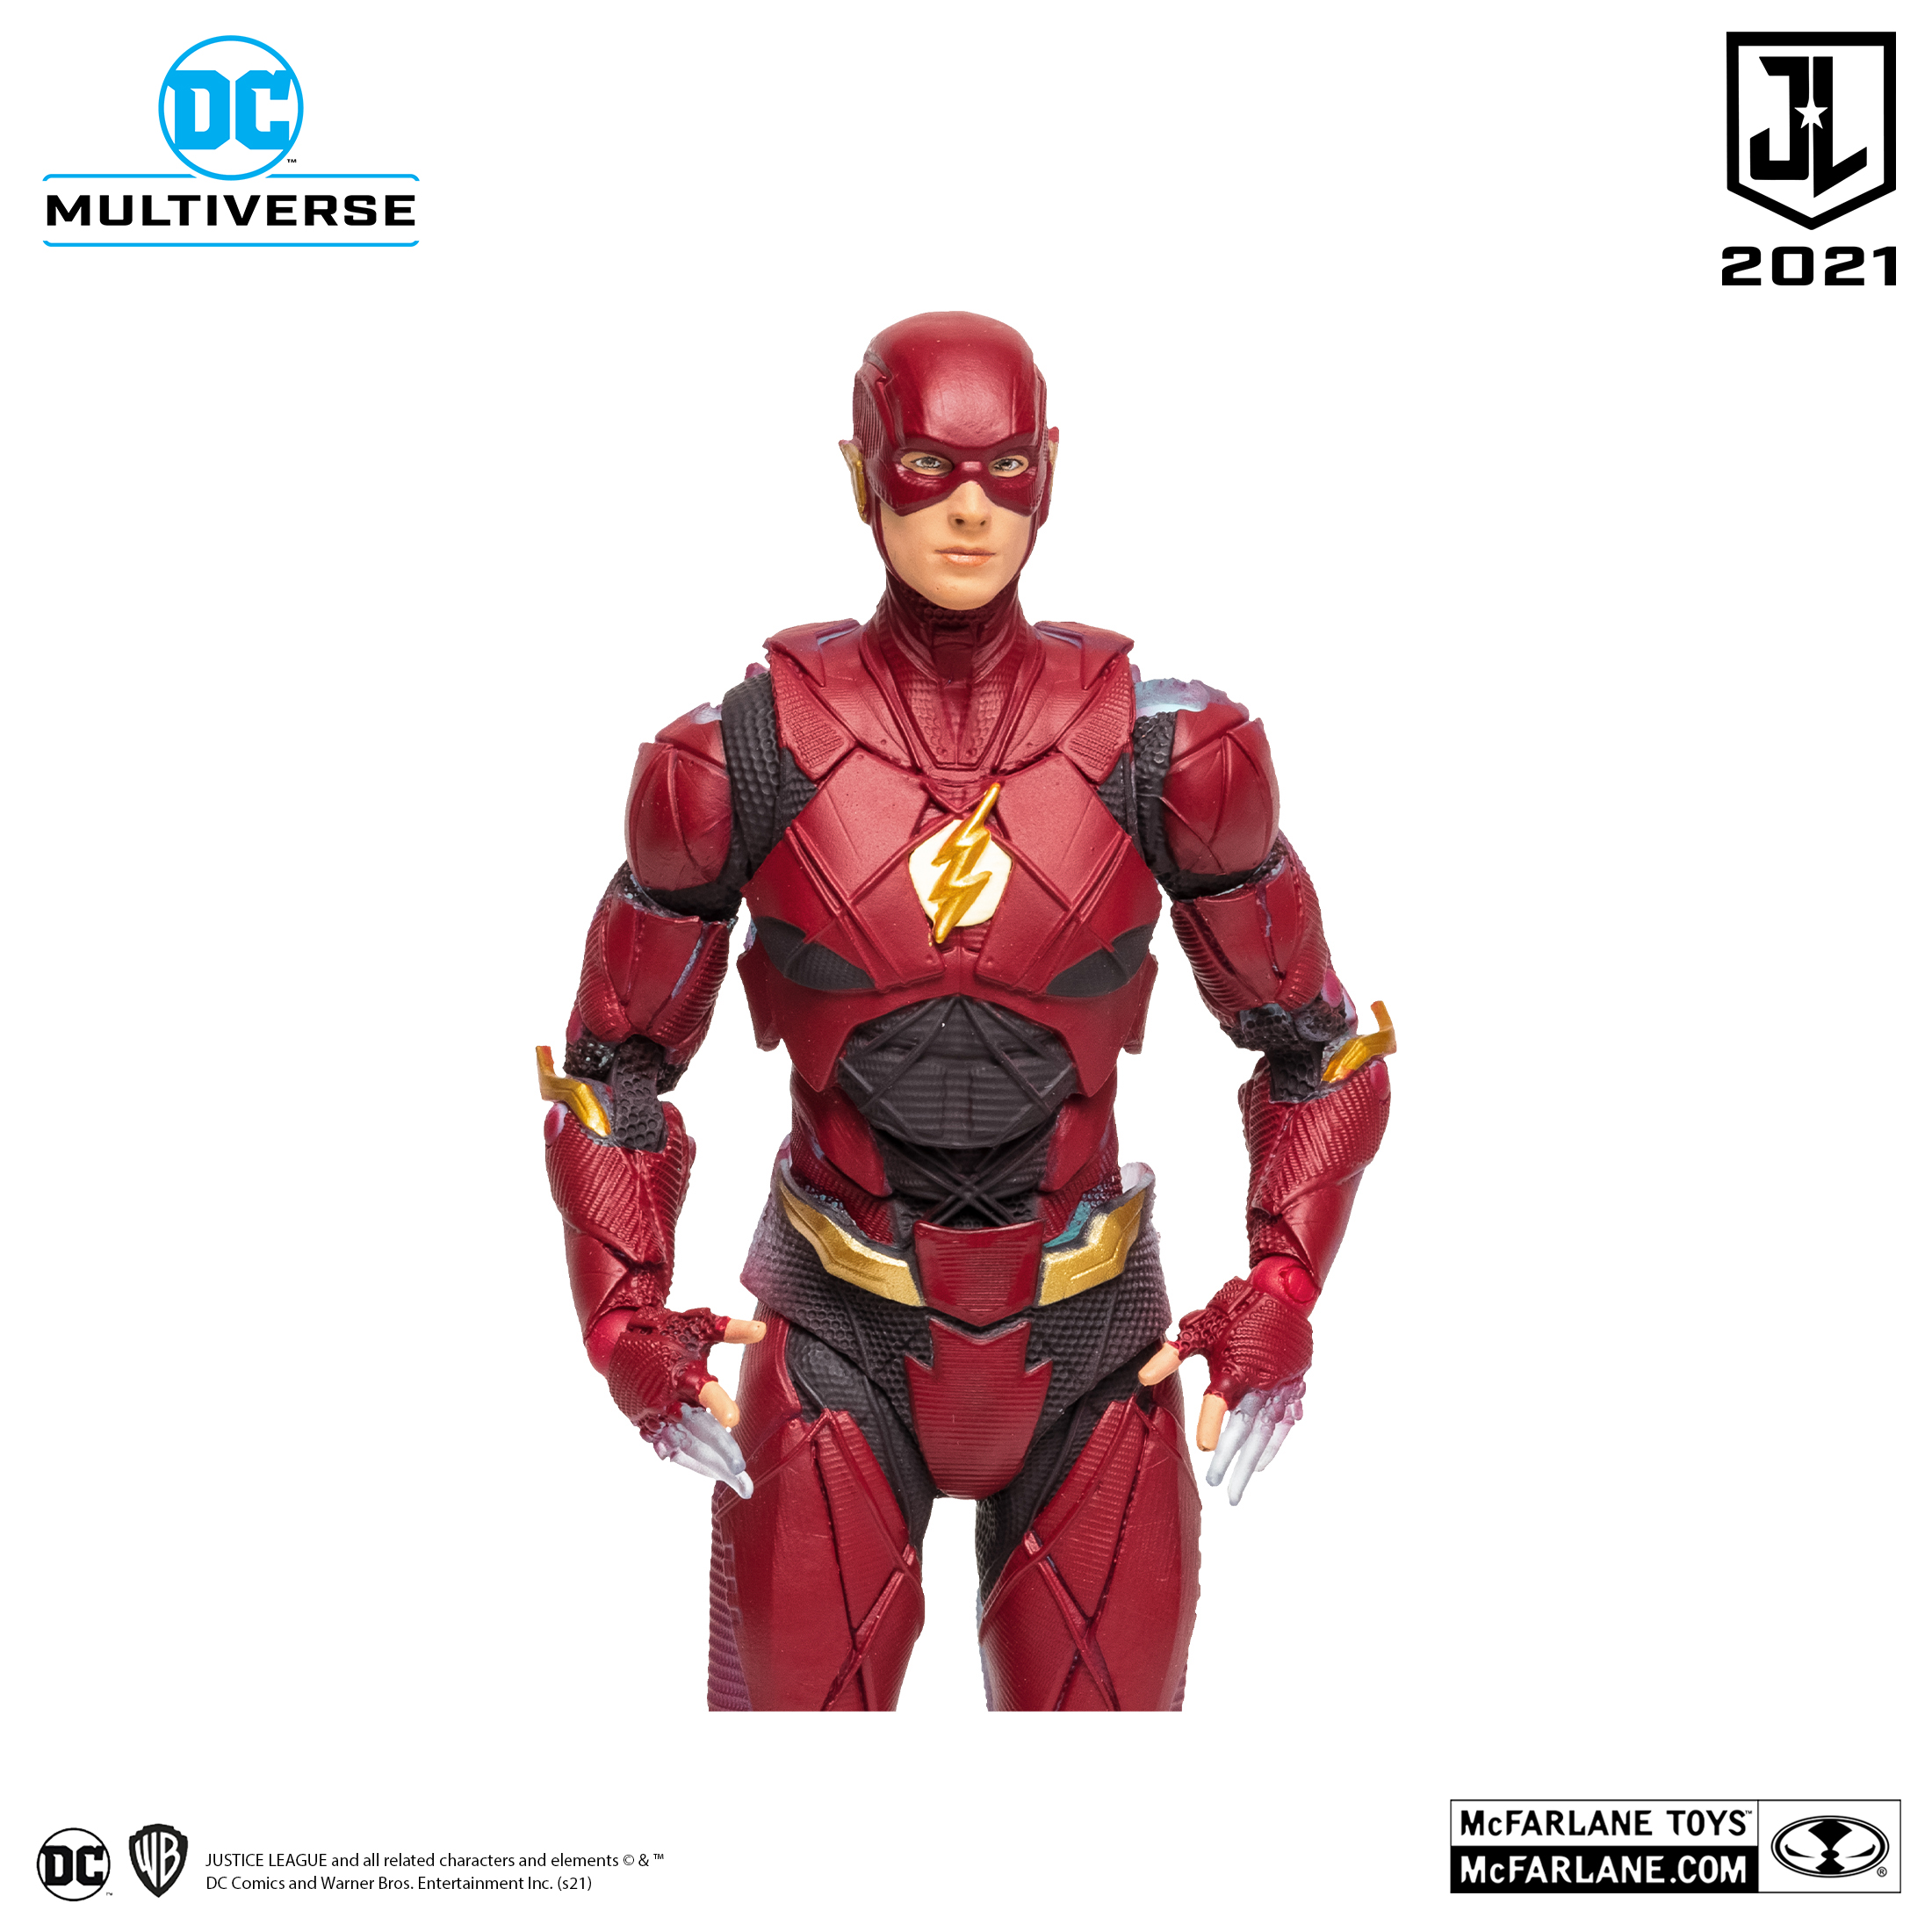 Details about   DC Multiverse The Flash White Knight New Sealed Barry Allen McFarlane Toys 